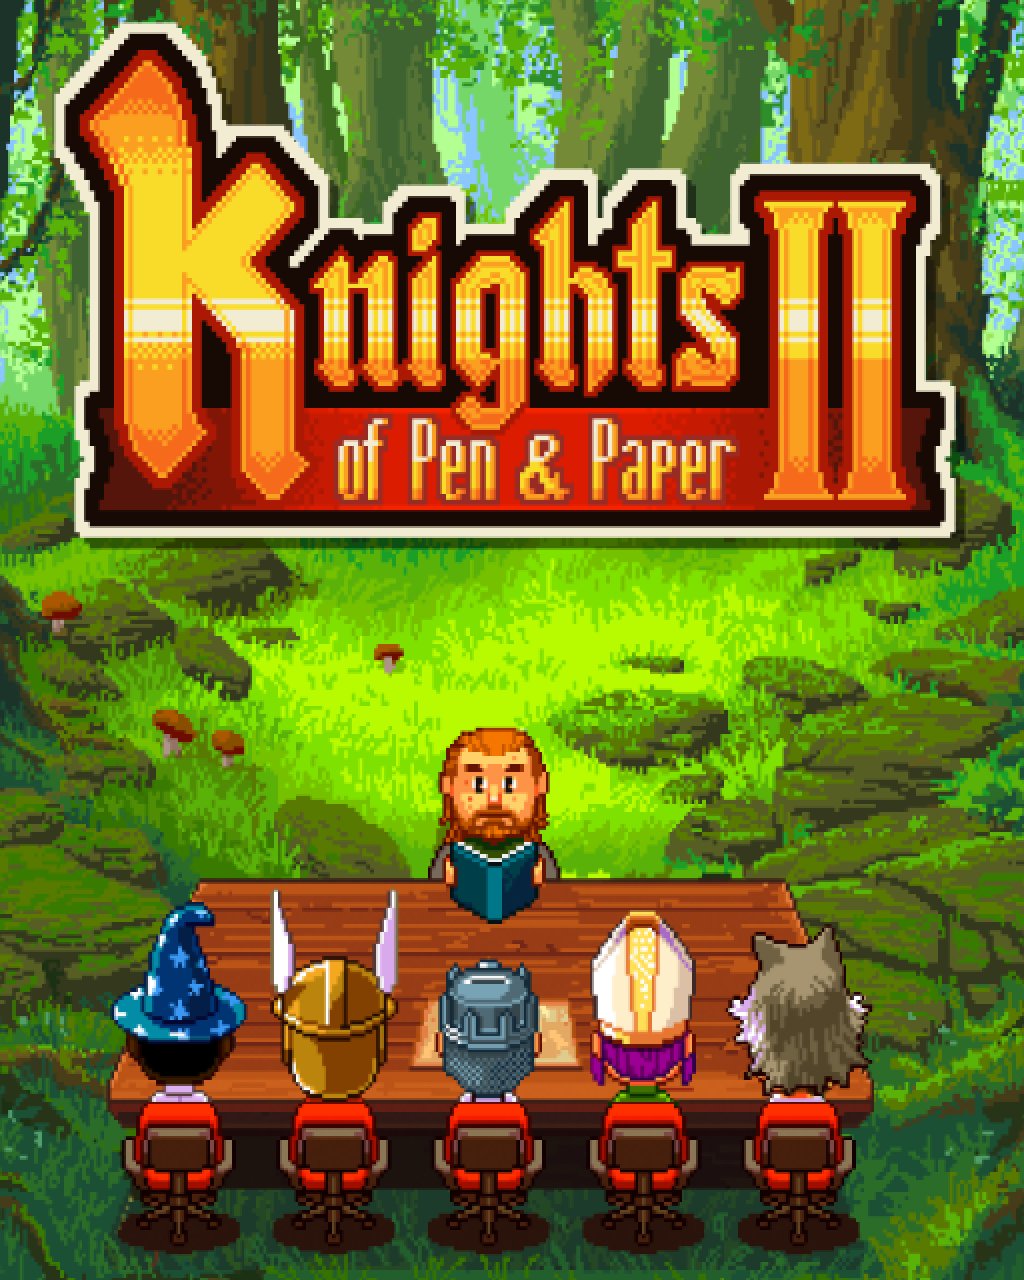 Knights of Pen and Paper 2